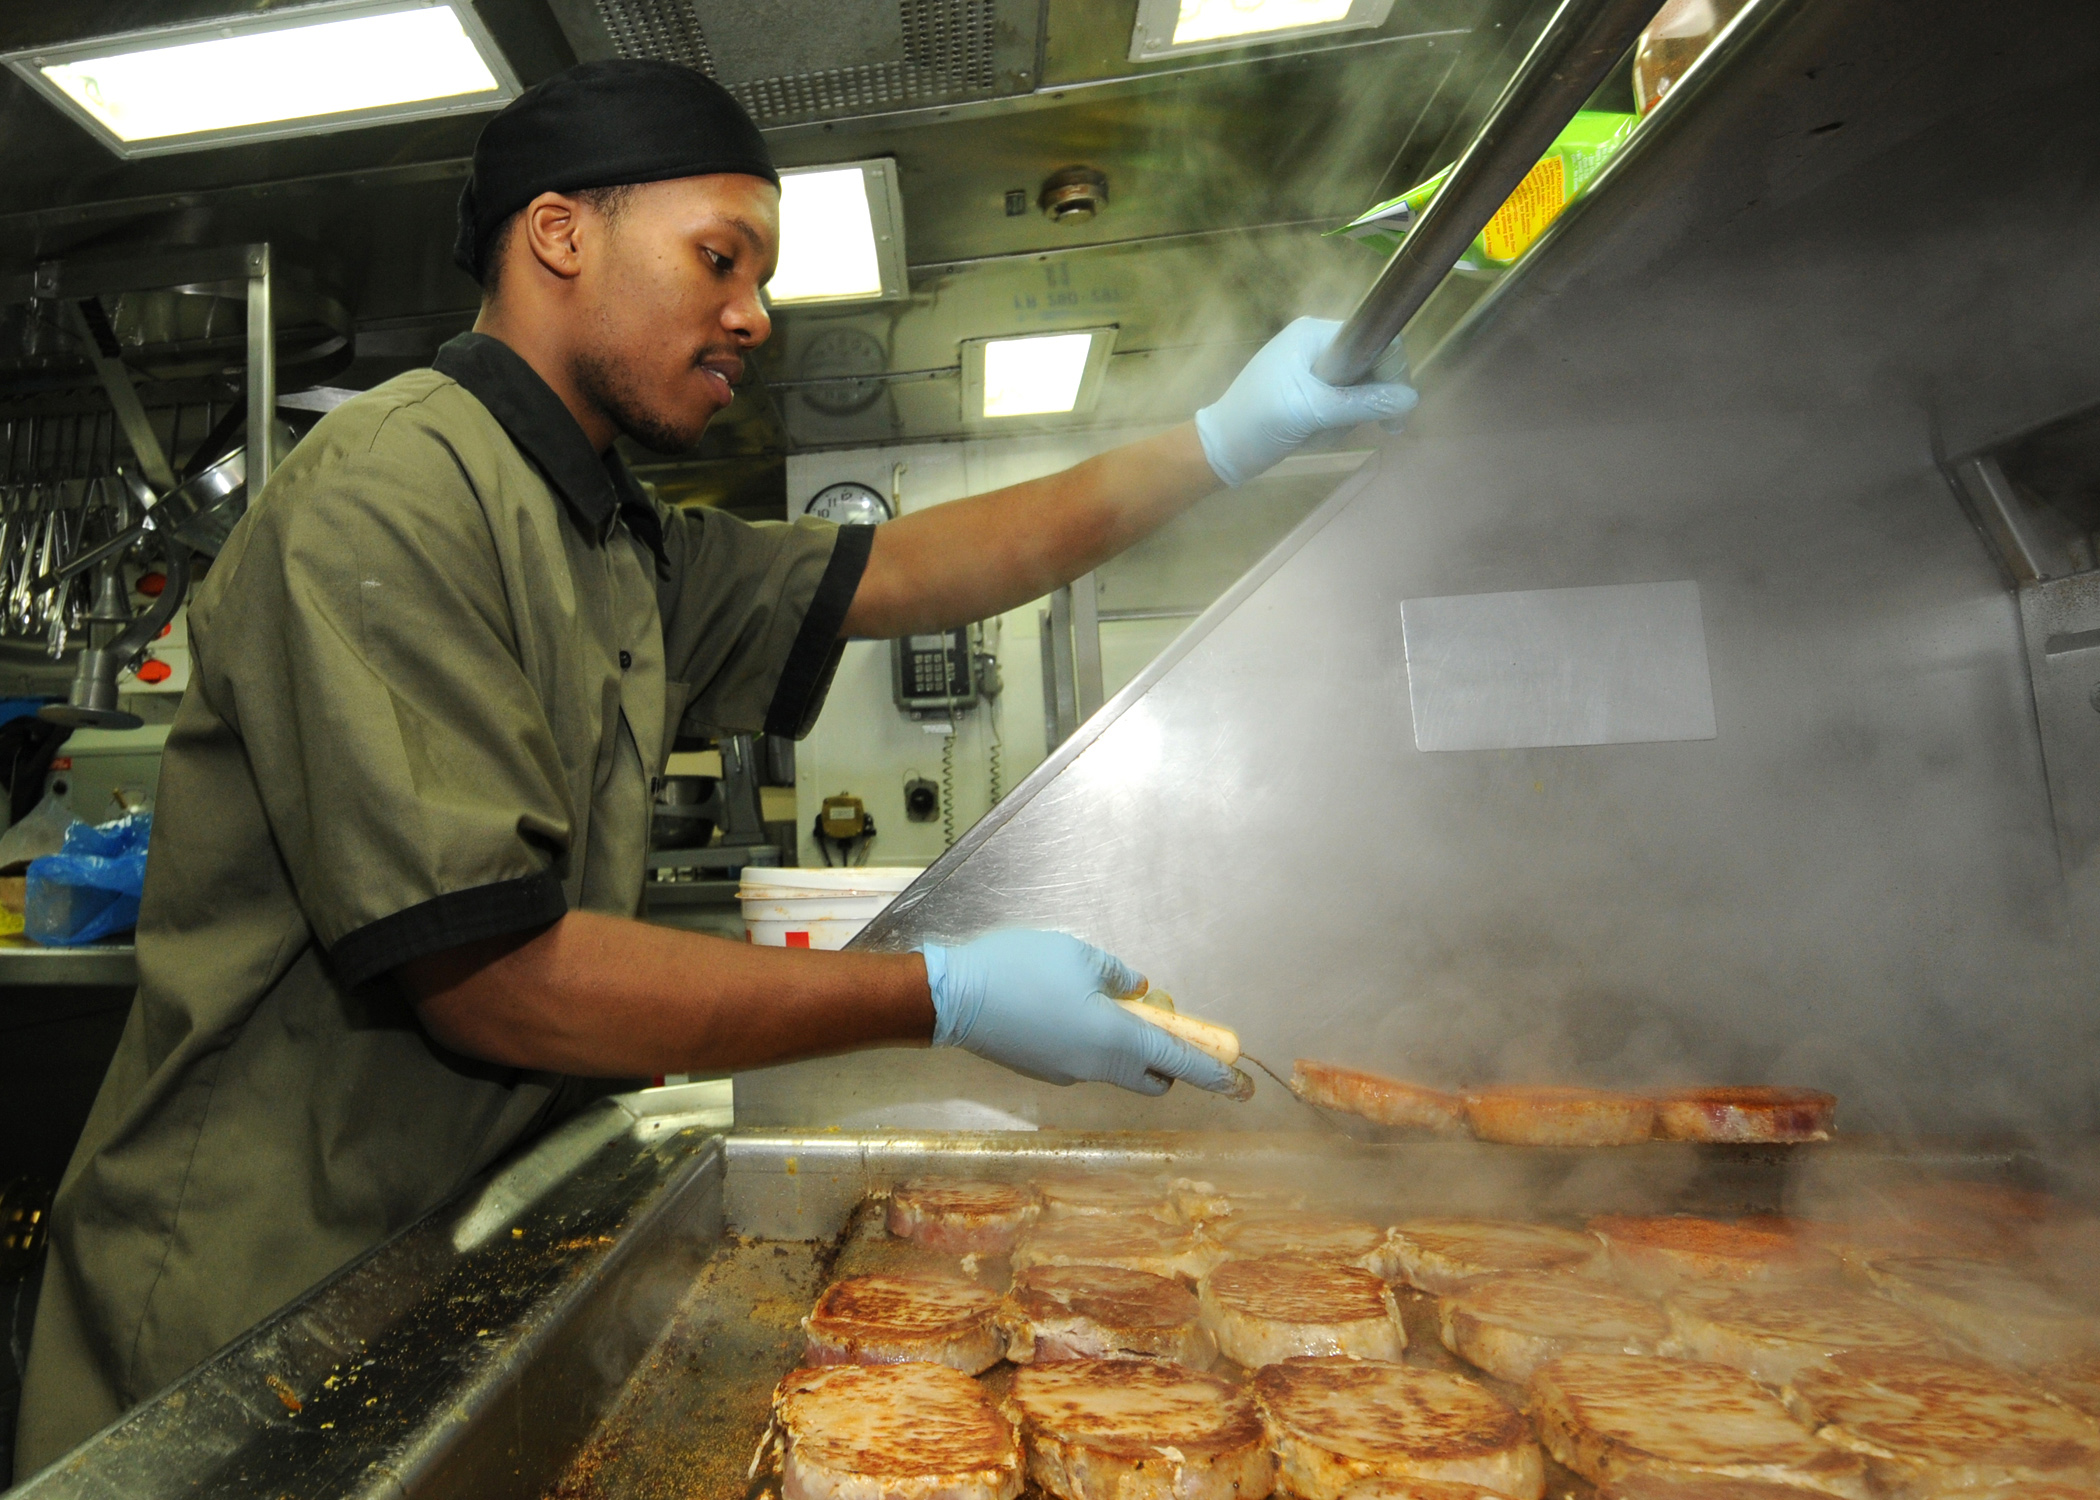 Defense.gov News Photo 110124-N-9793B-024 - Seaman Diante A. Johnson prepares pork chops in the ship s galley for the crew aboard the guided-missile cruiser USS Anzio CG 68 underway in the